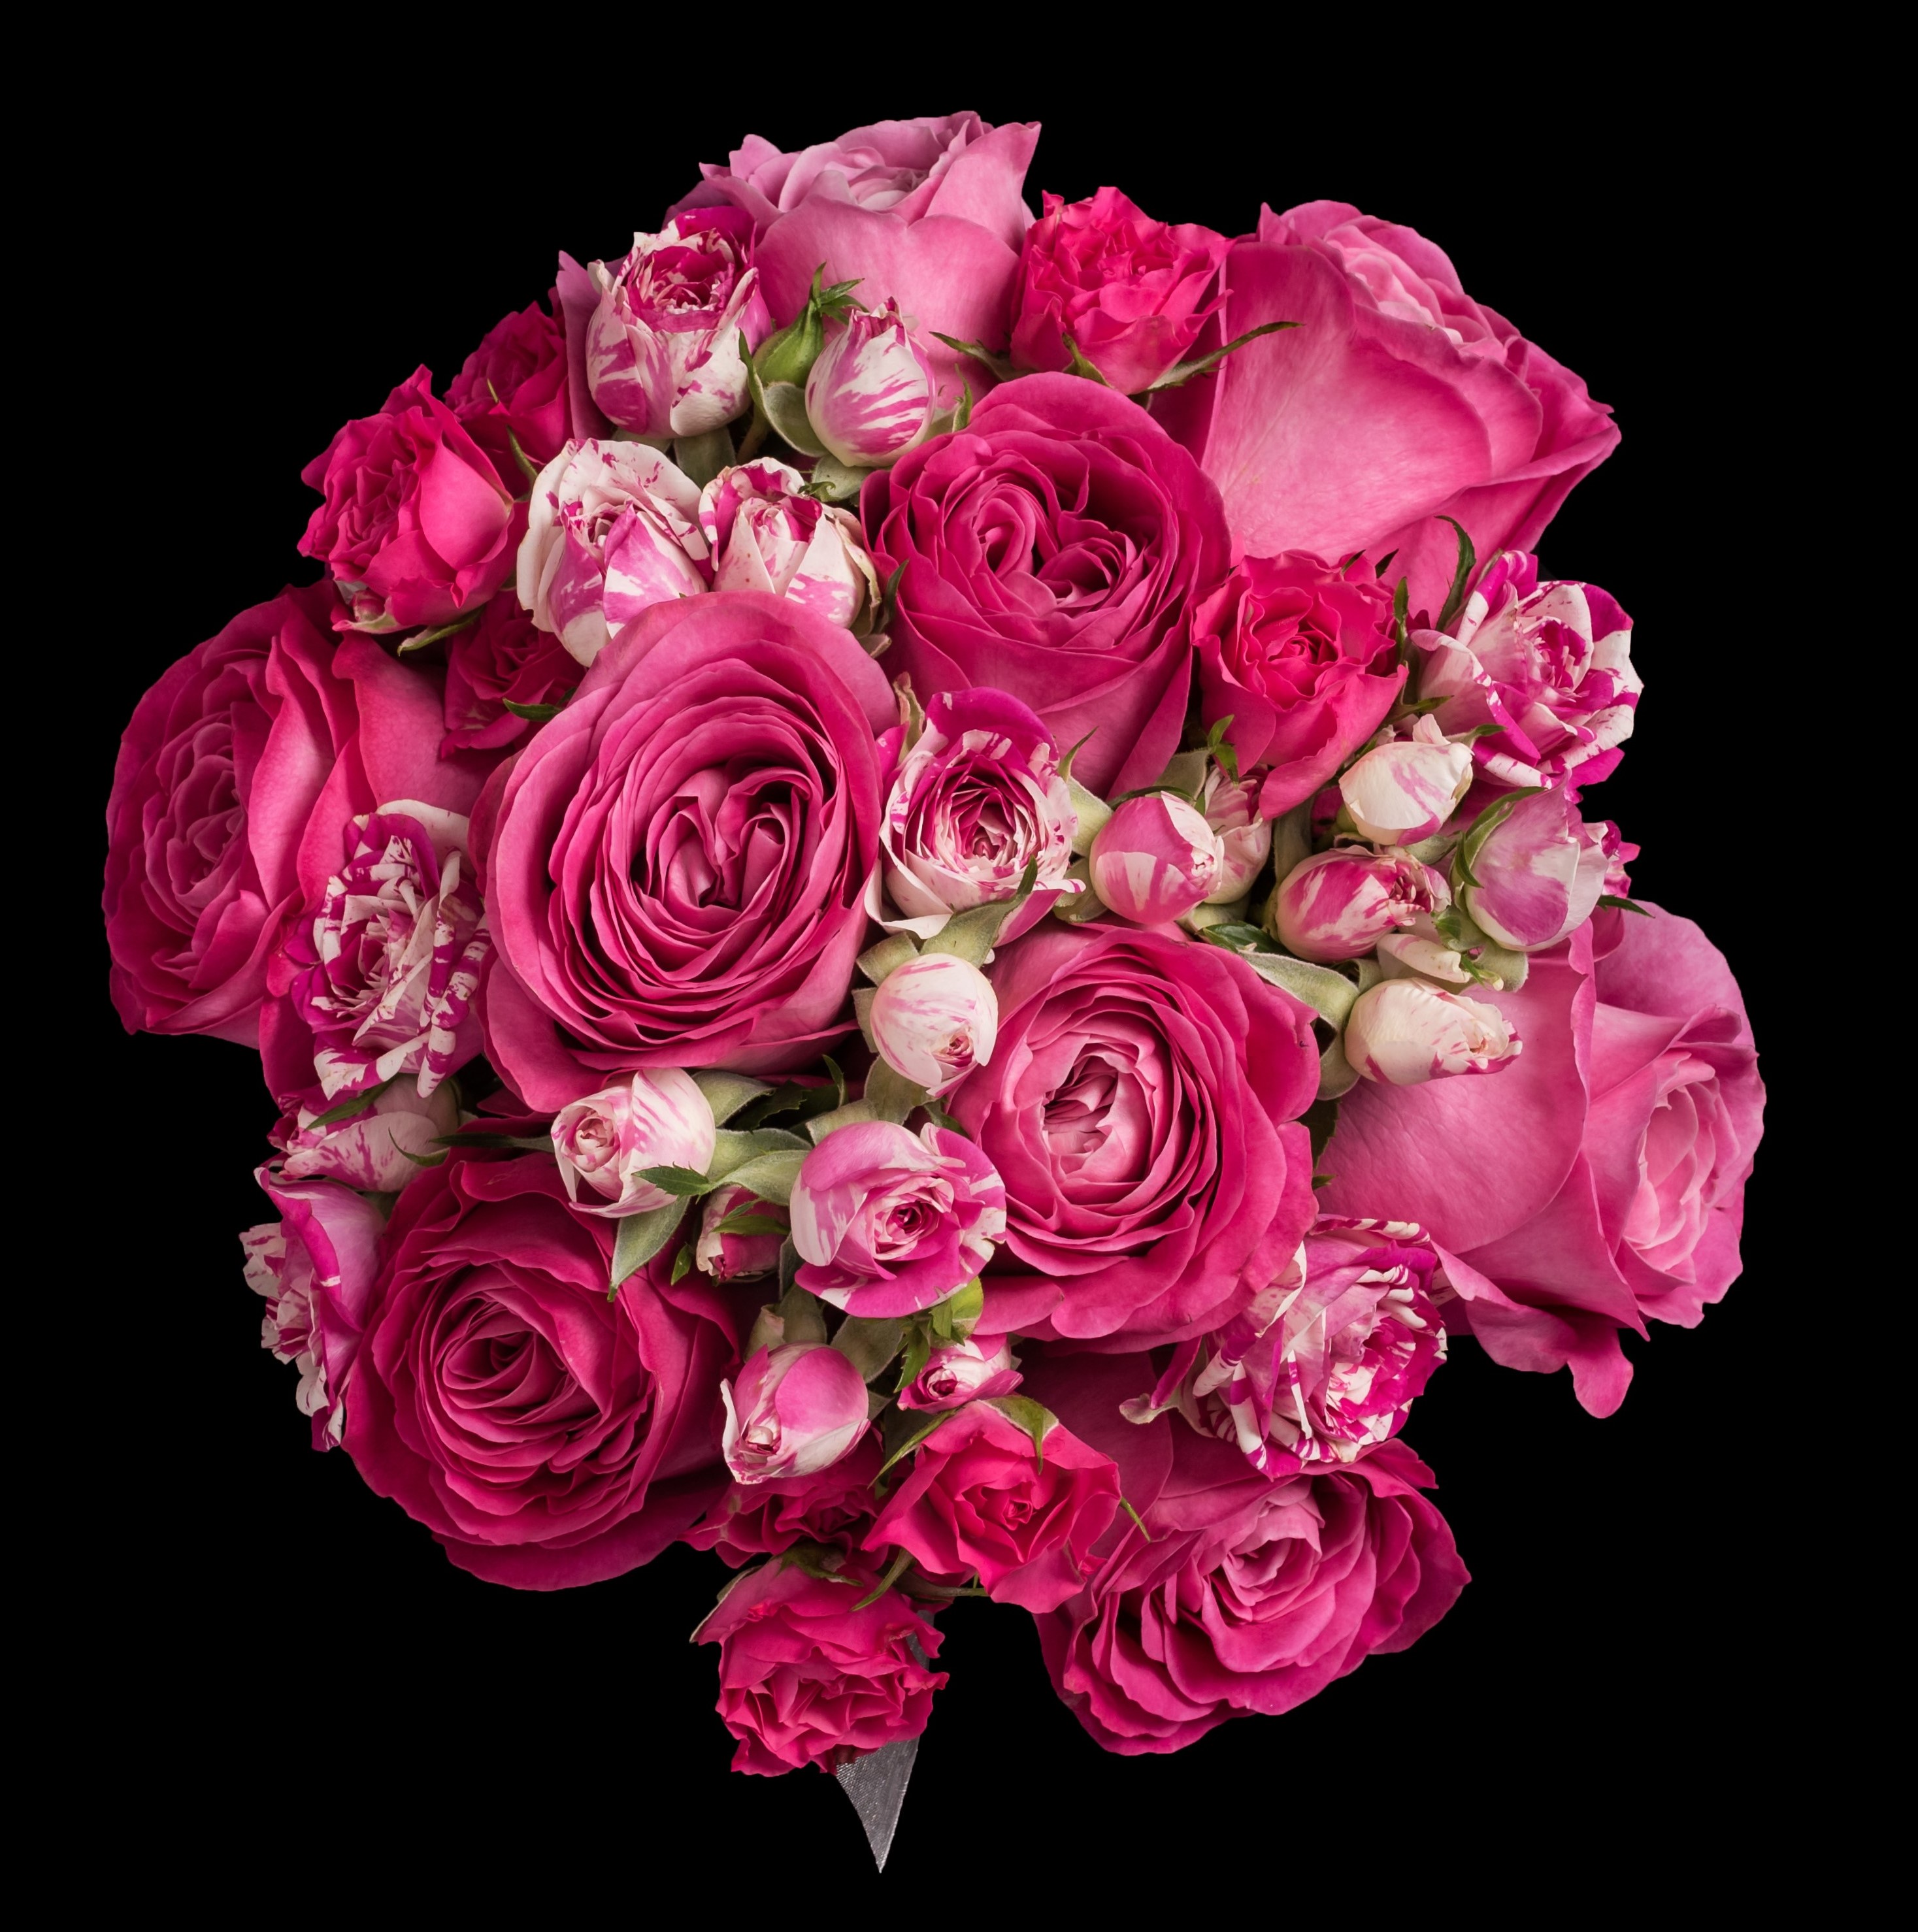 wedding flowers for bride in a hand tied style just hot pink roses